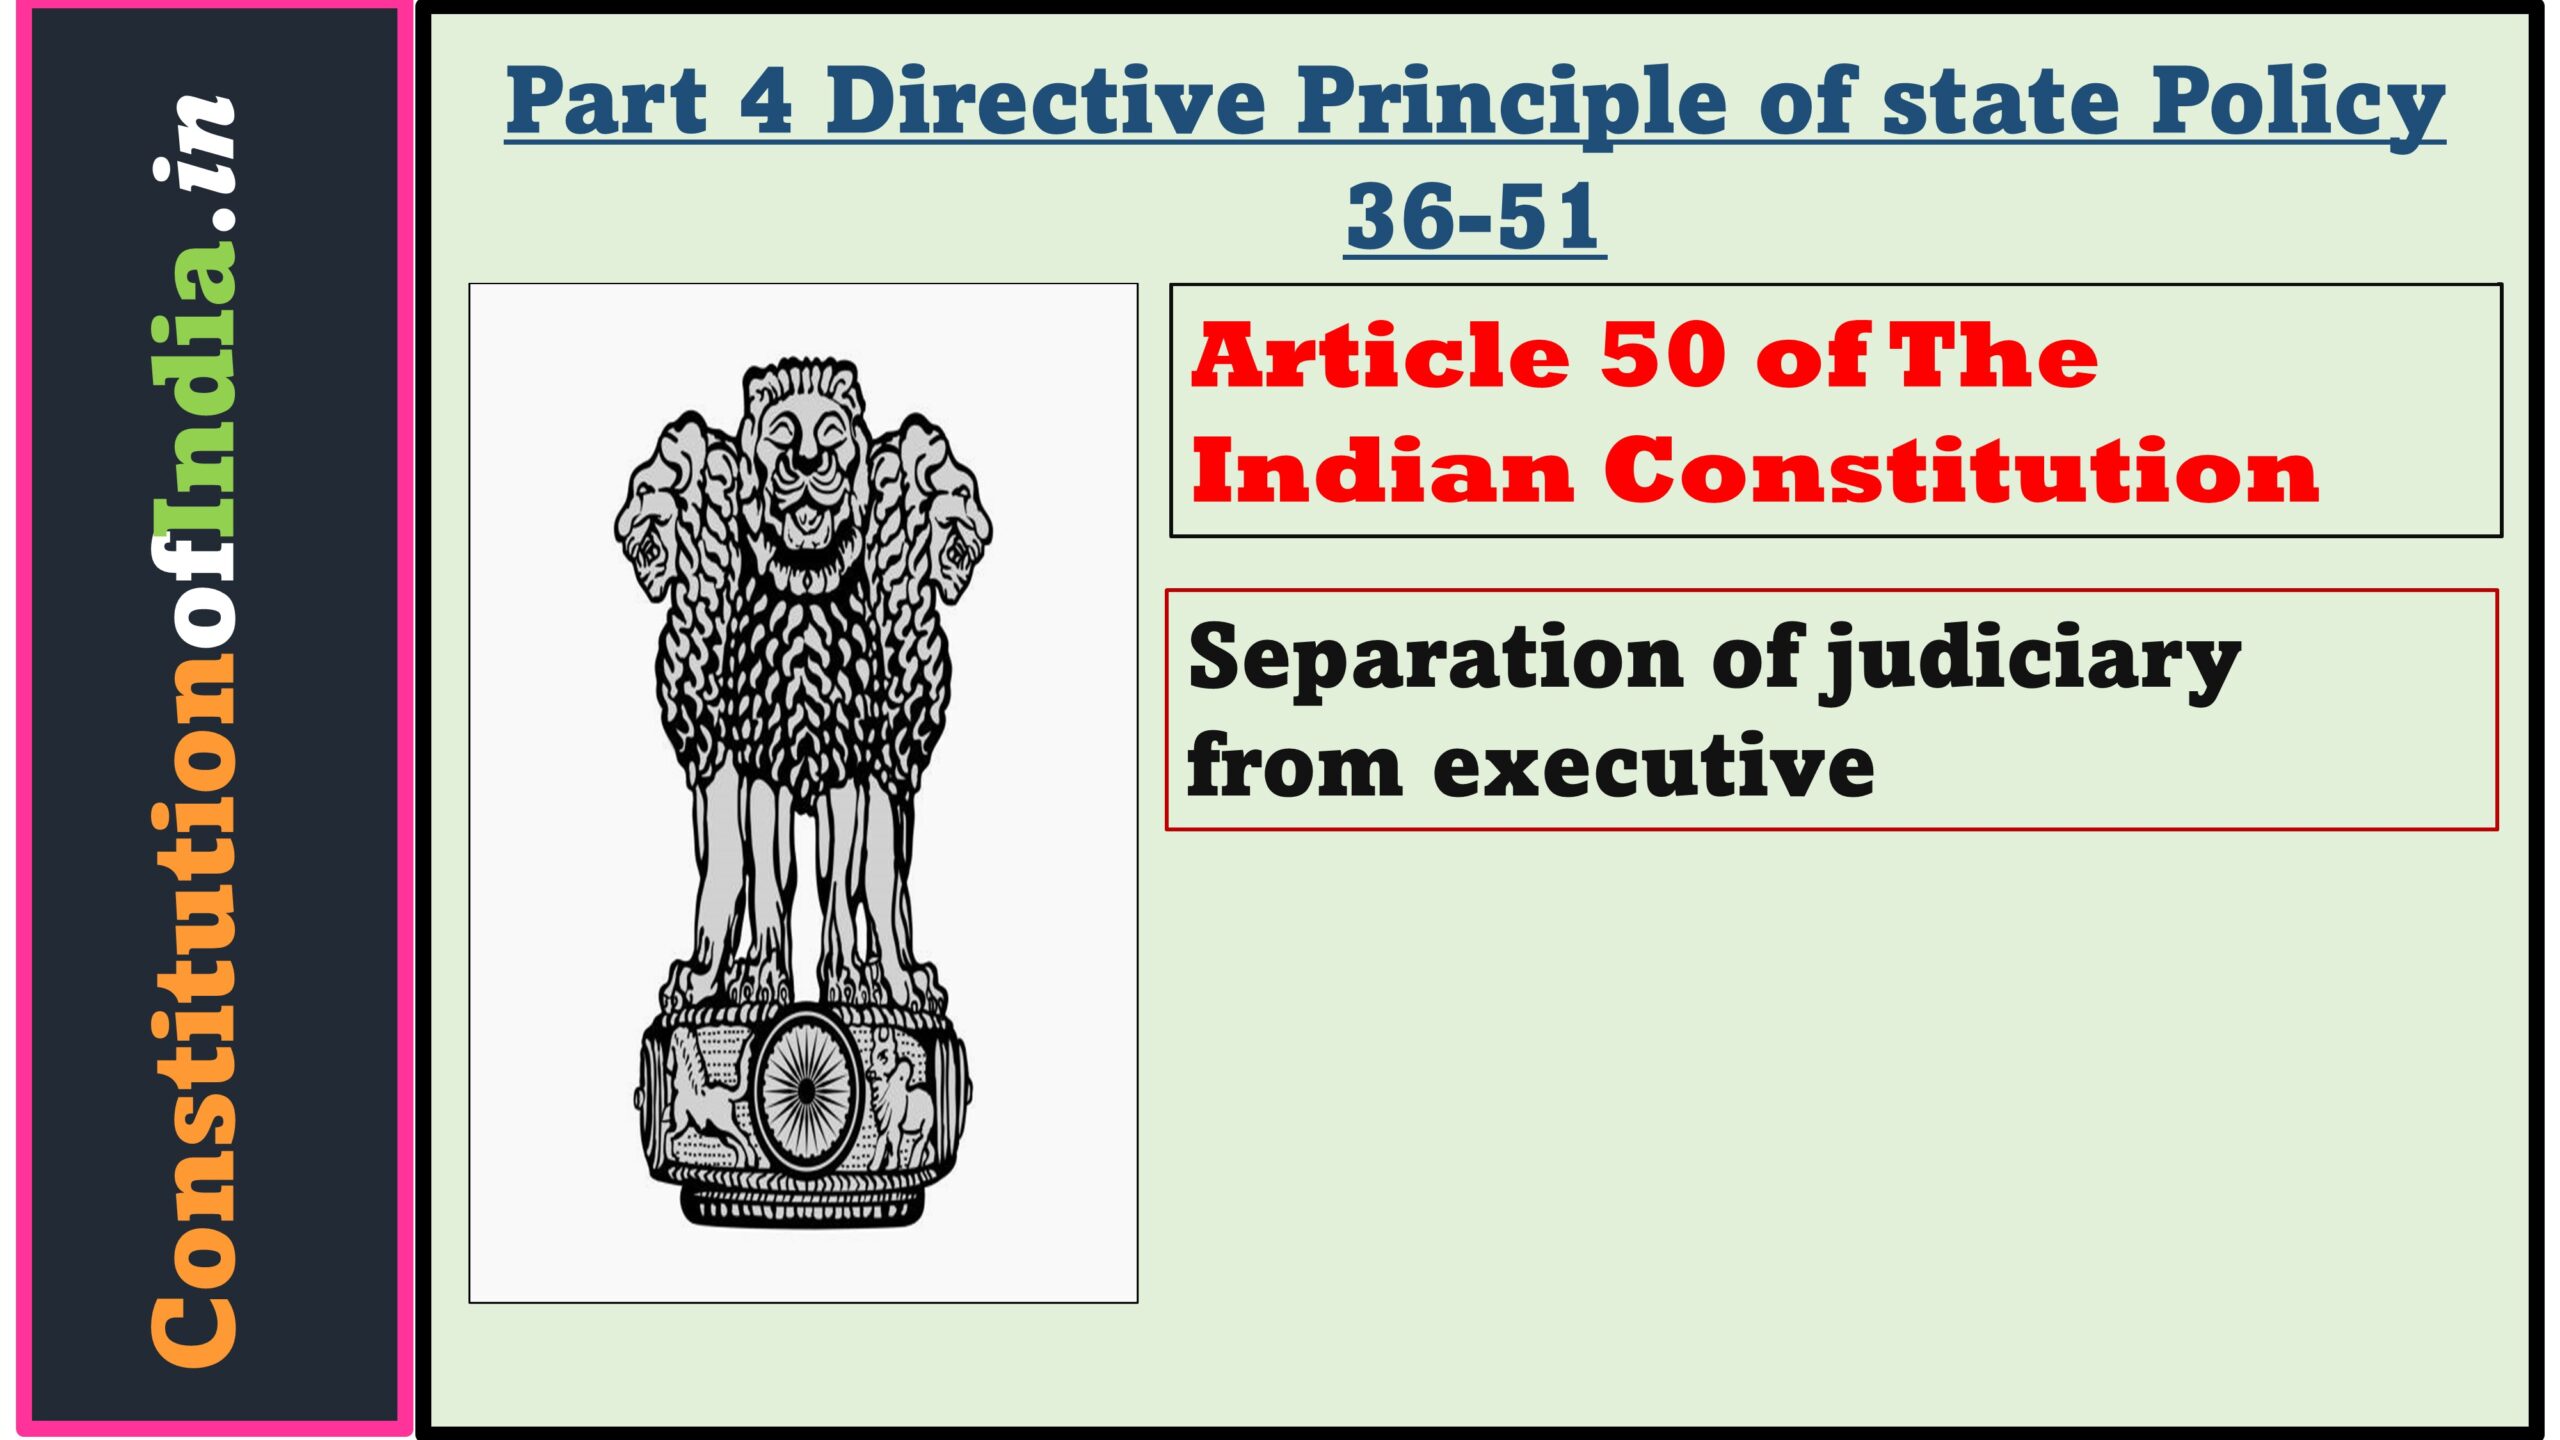 Article 49 of Indian Constitution